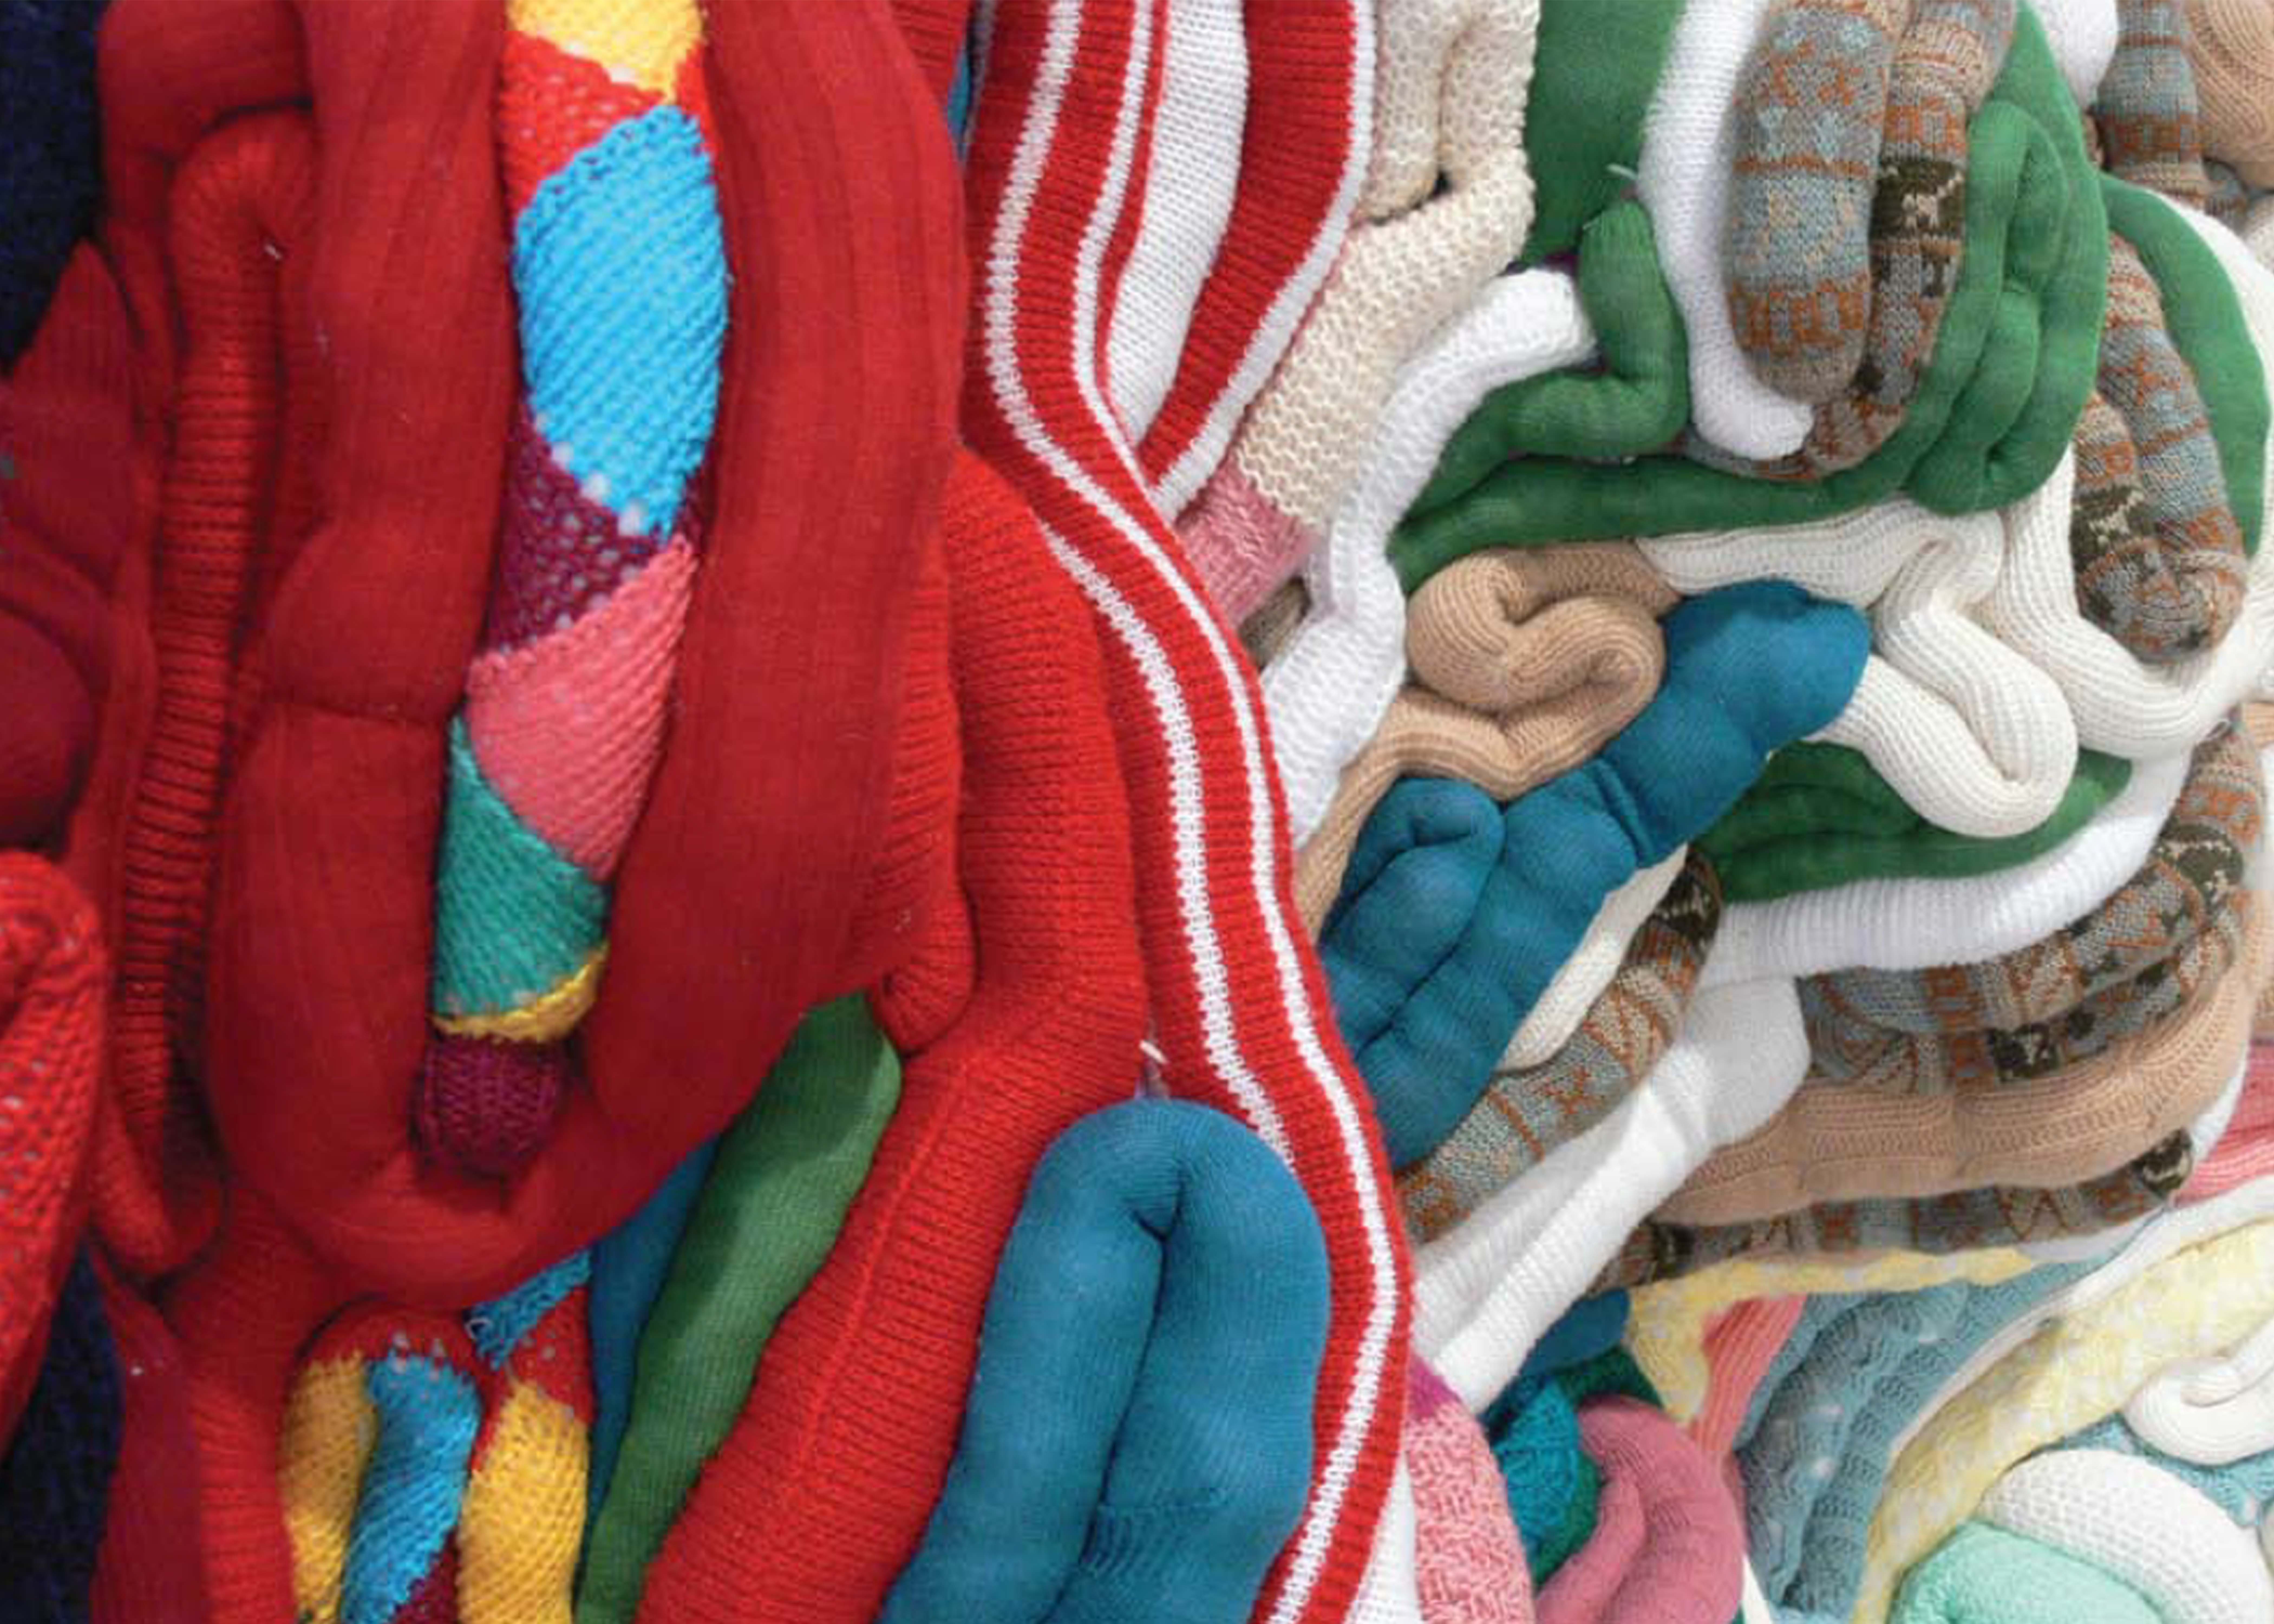 Close up photograph of a colourful knitted structure.